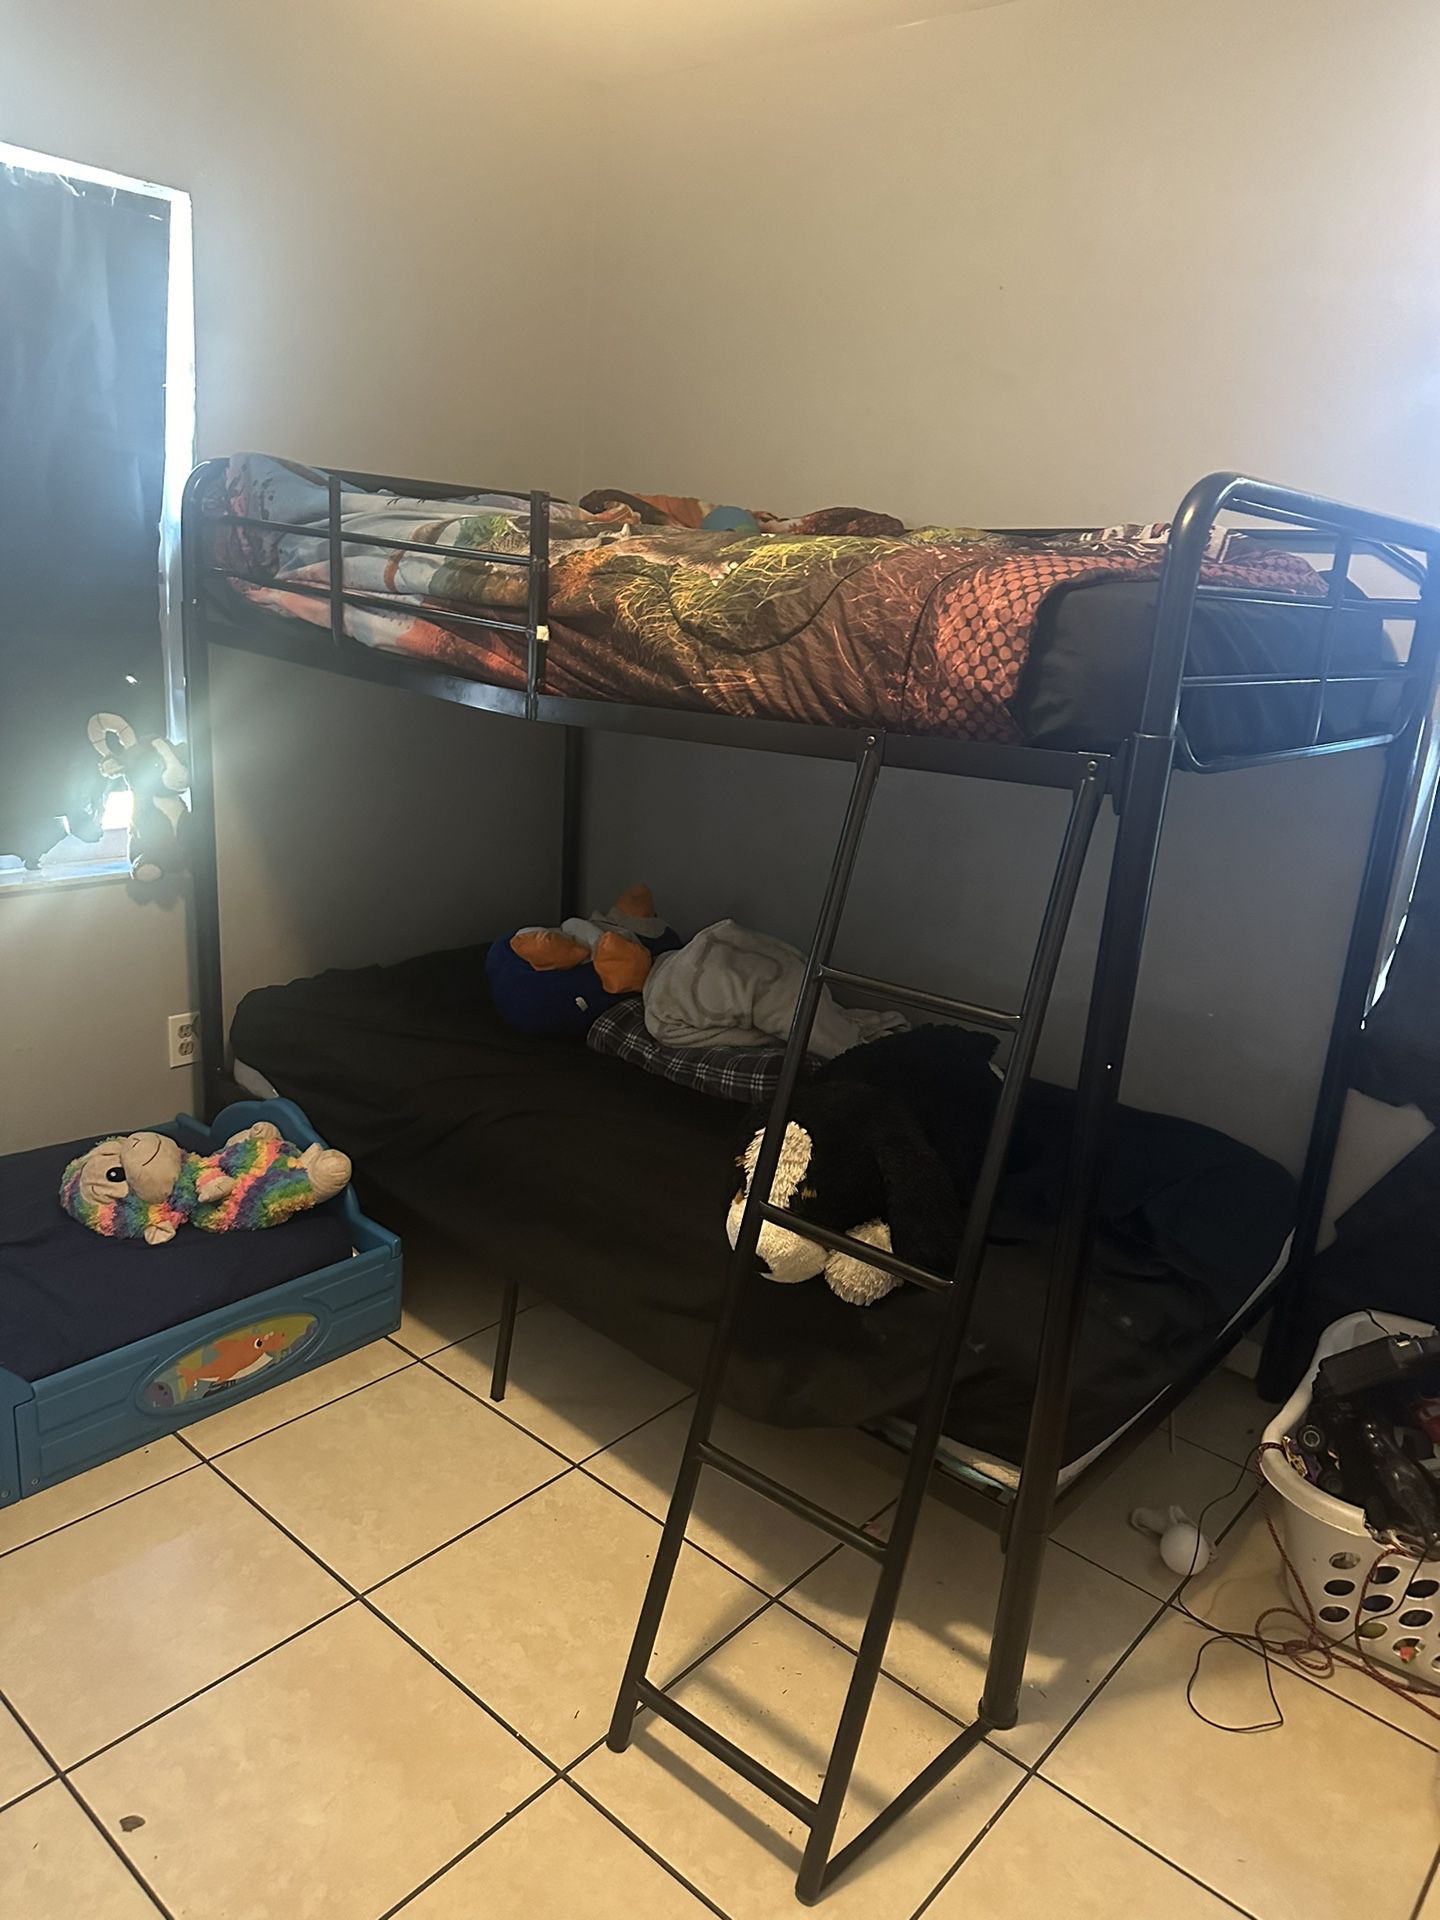 Twin Size Bunk Beds (mattress Not Included)